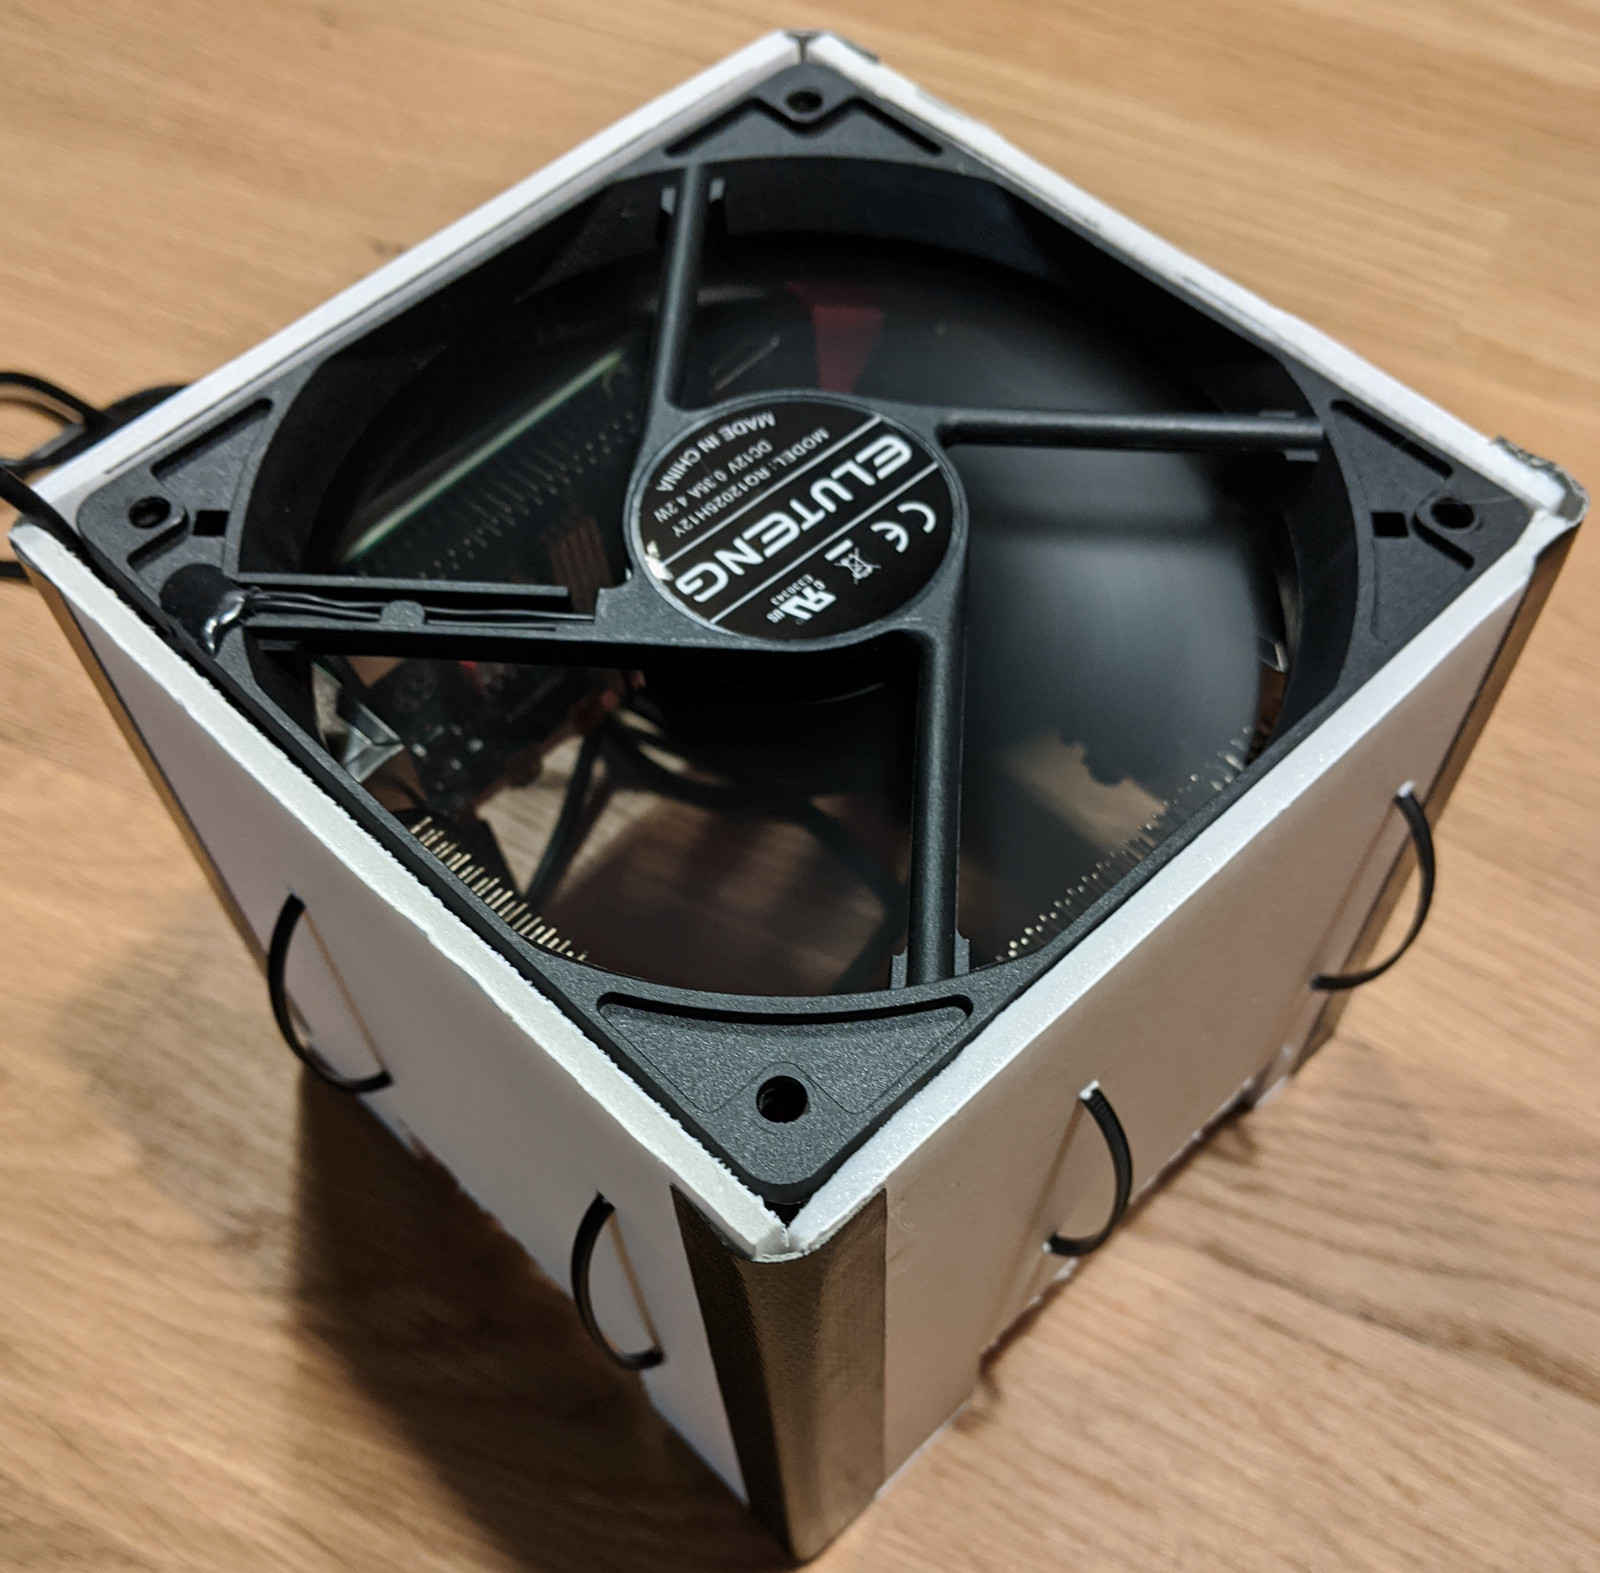 The Pi-fan-cube thing